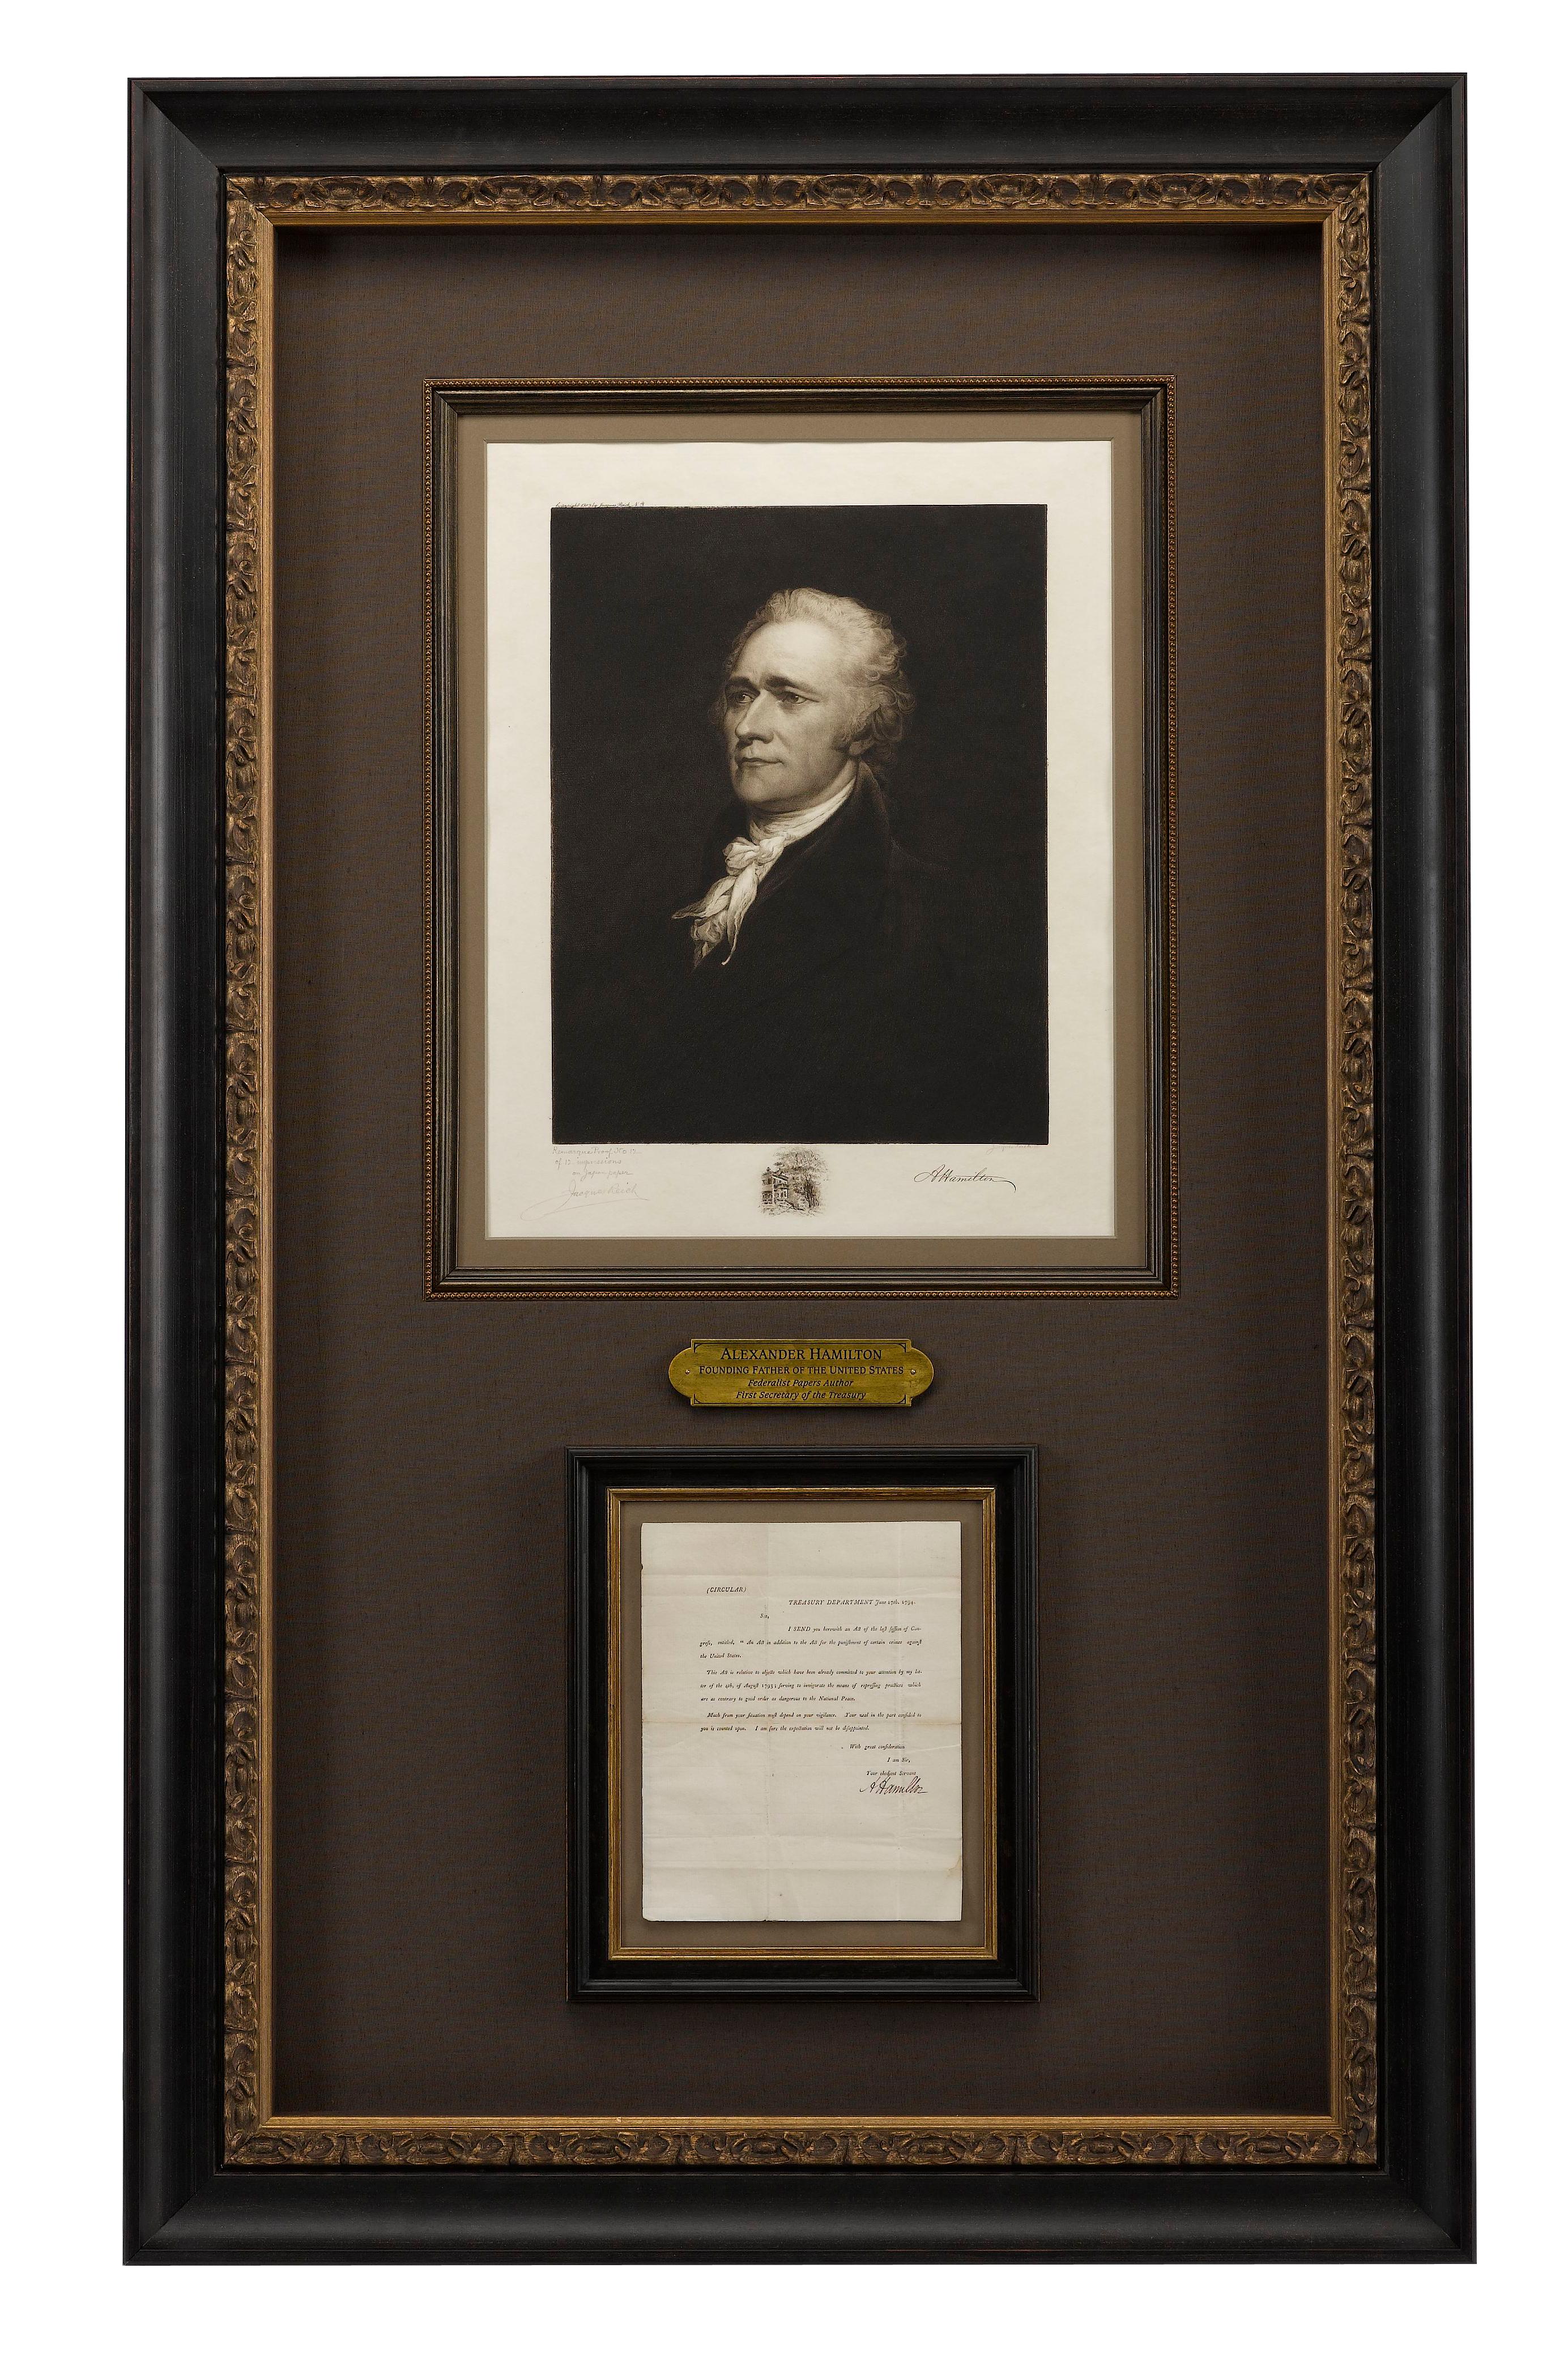 Presented is an original collage featuring the autograph of Alexander Hamilton. This one of a kind collage highlights Hamilton, with an original signed Treasury Department circular letter, dated June 17th, 1794. The letter has been framed underneath